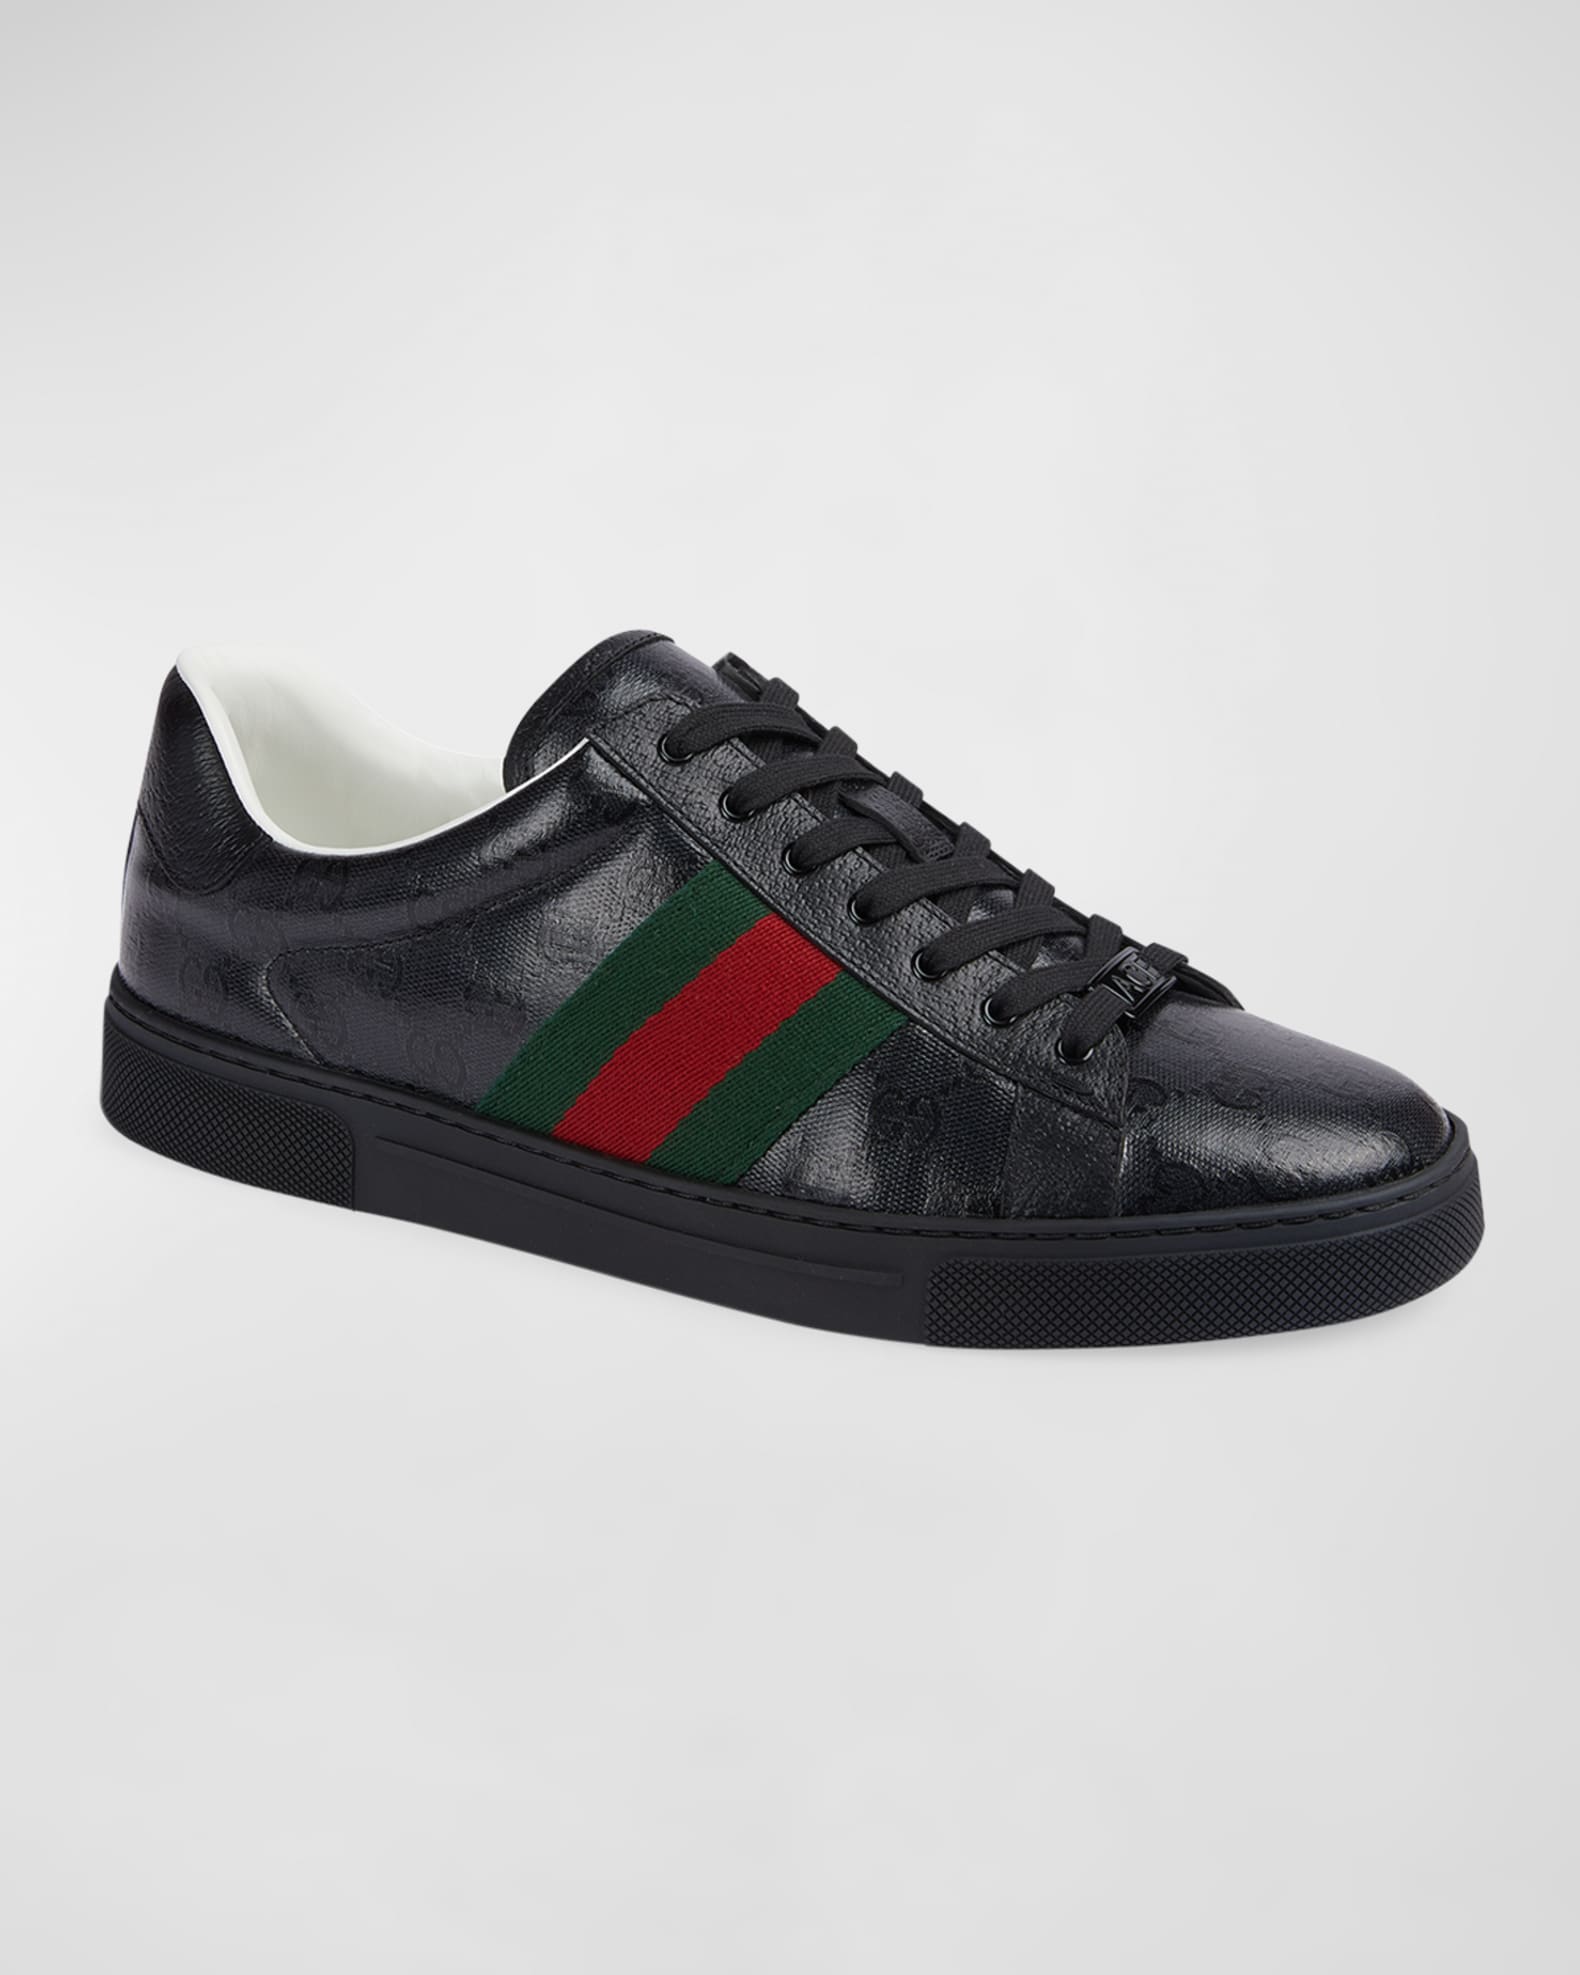 Gucci Men's Ace GG Crystal Canvas Sneakers | Neiman Marcus